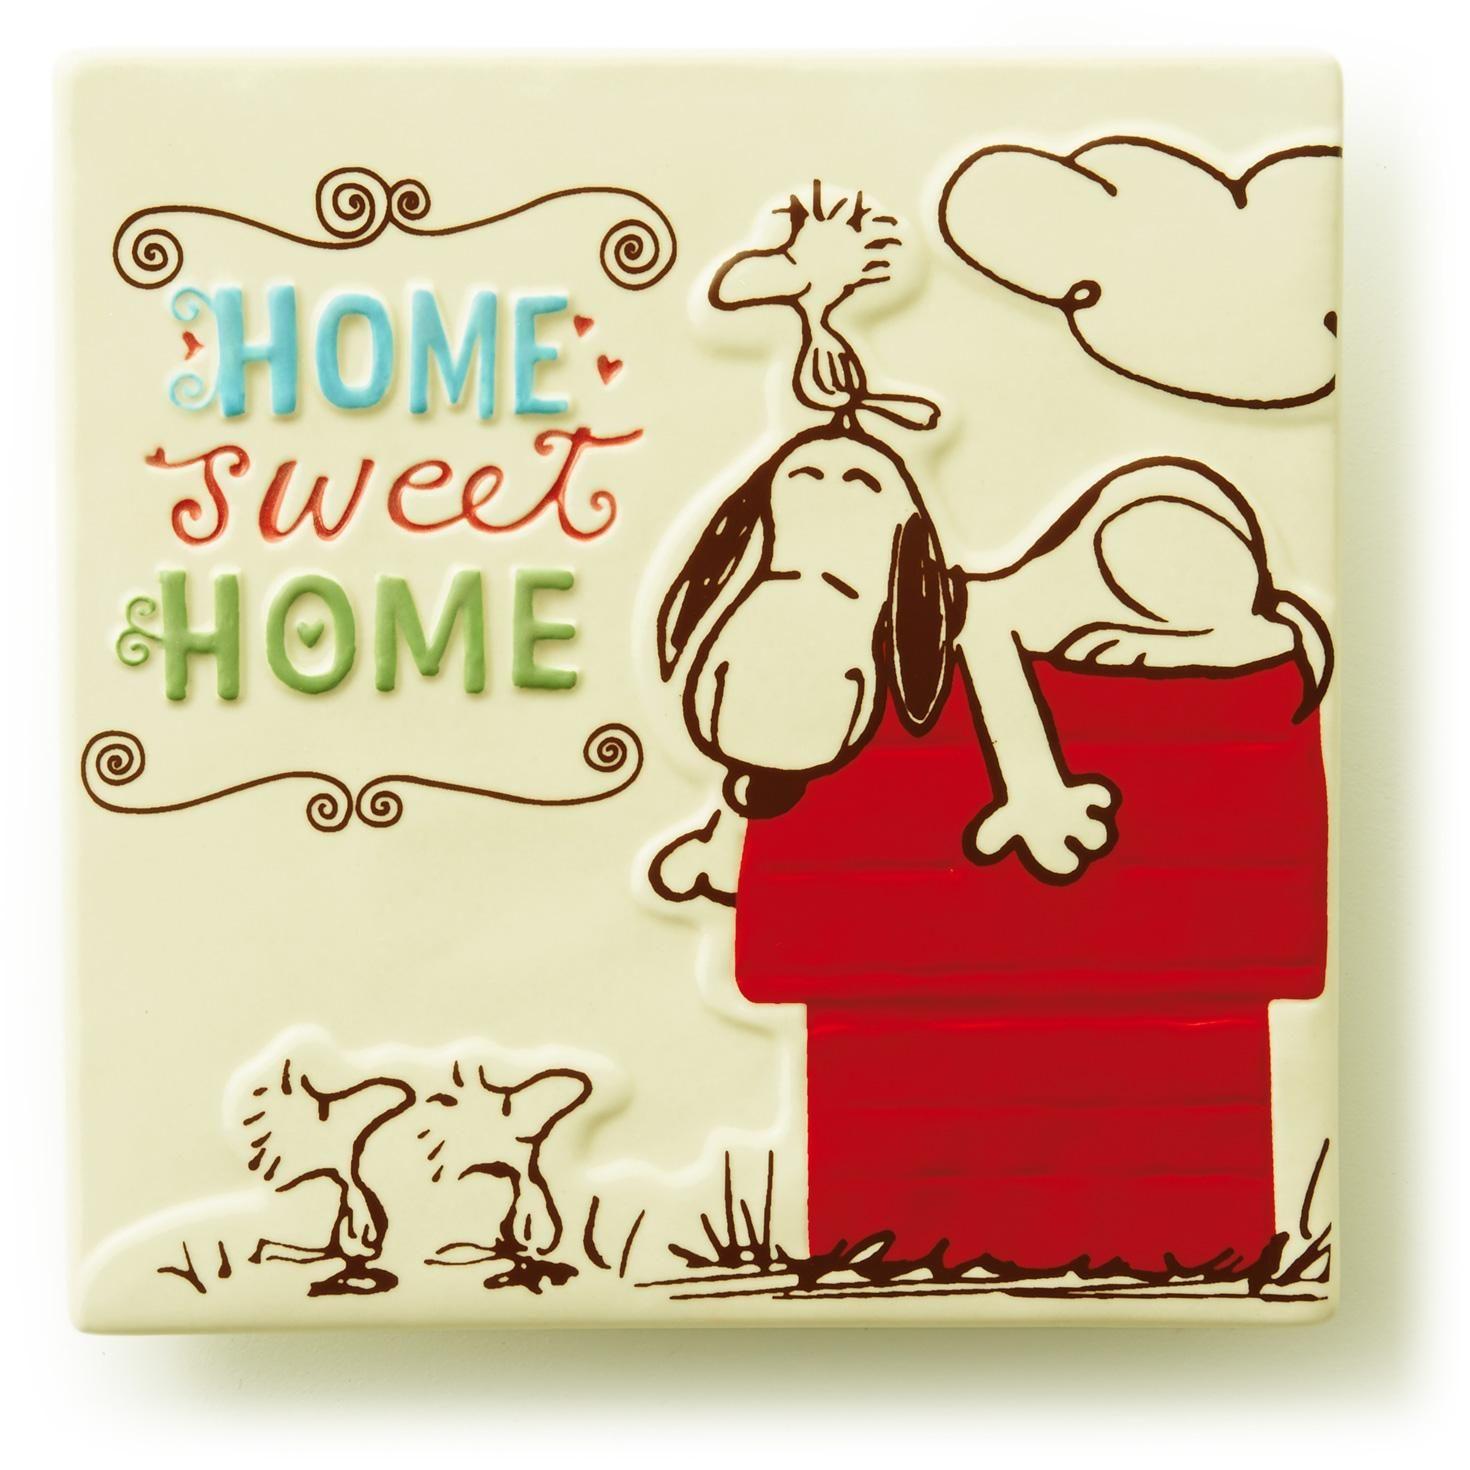 1470x1470px Home Sweet Home 152.97 KB